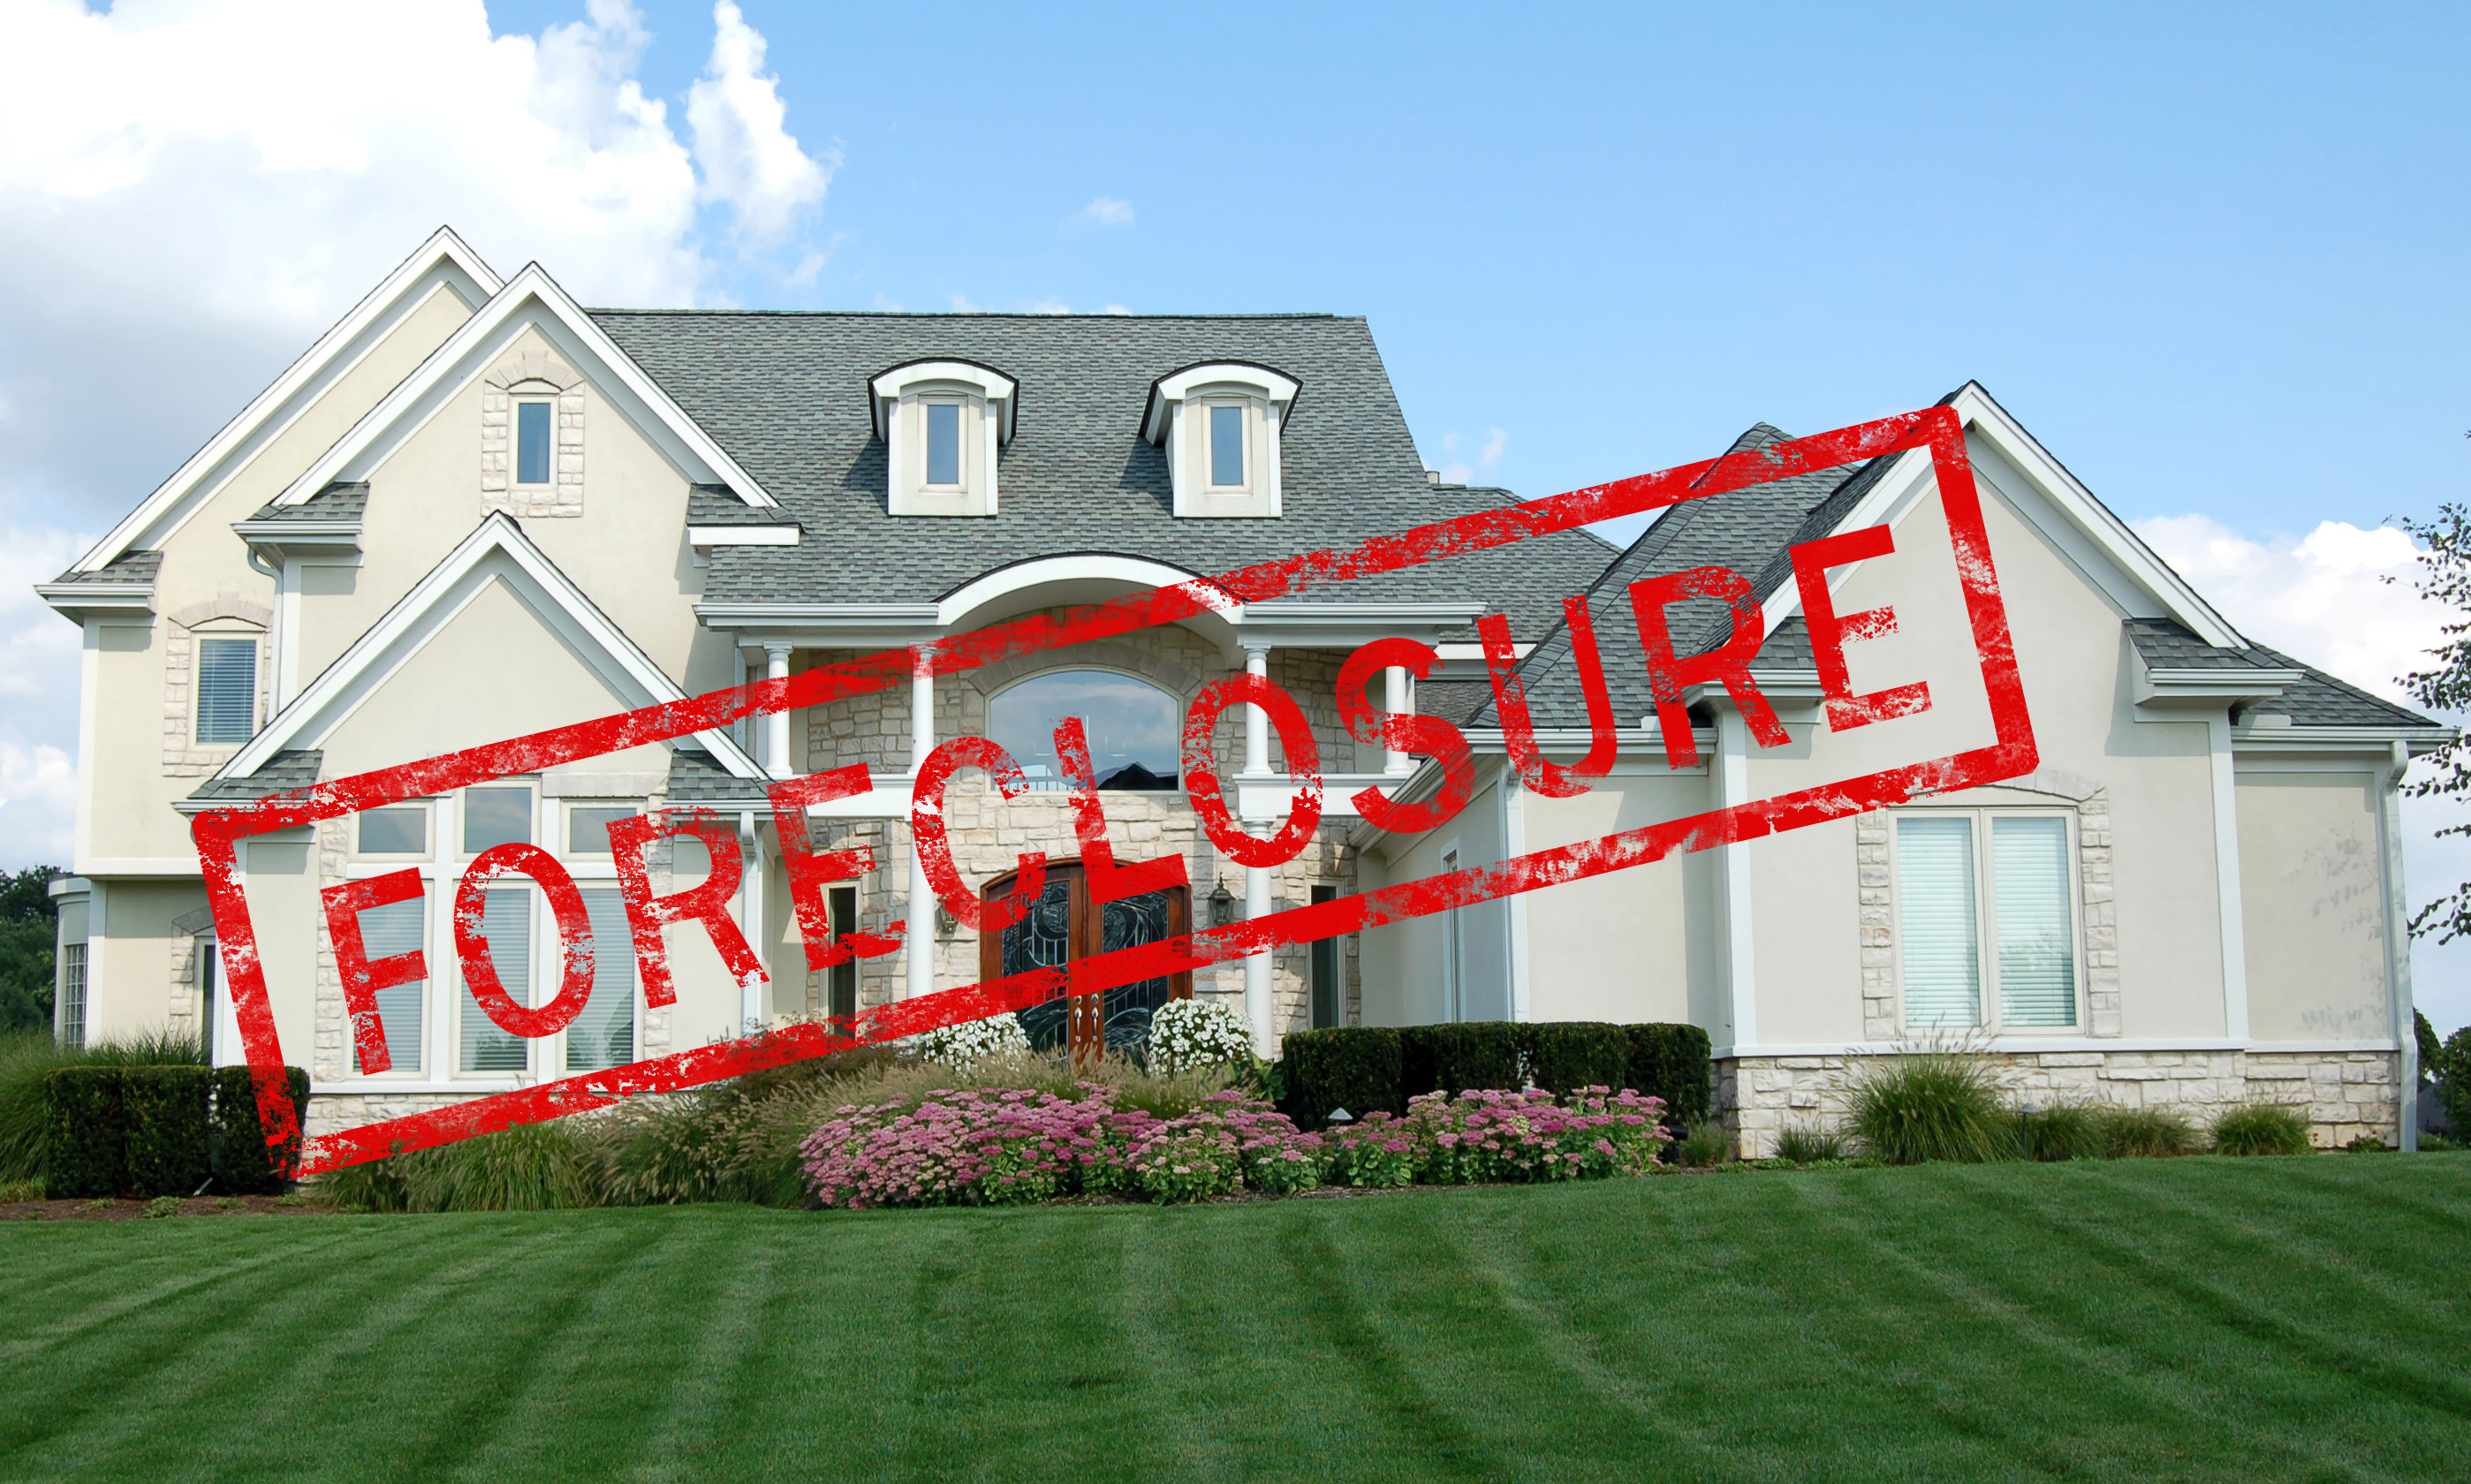 Call PS Professional Inc. when you need appraisals regarding Kendall foreclosures